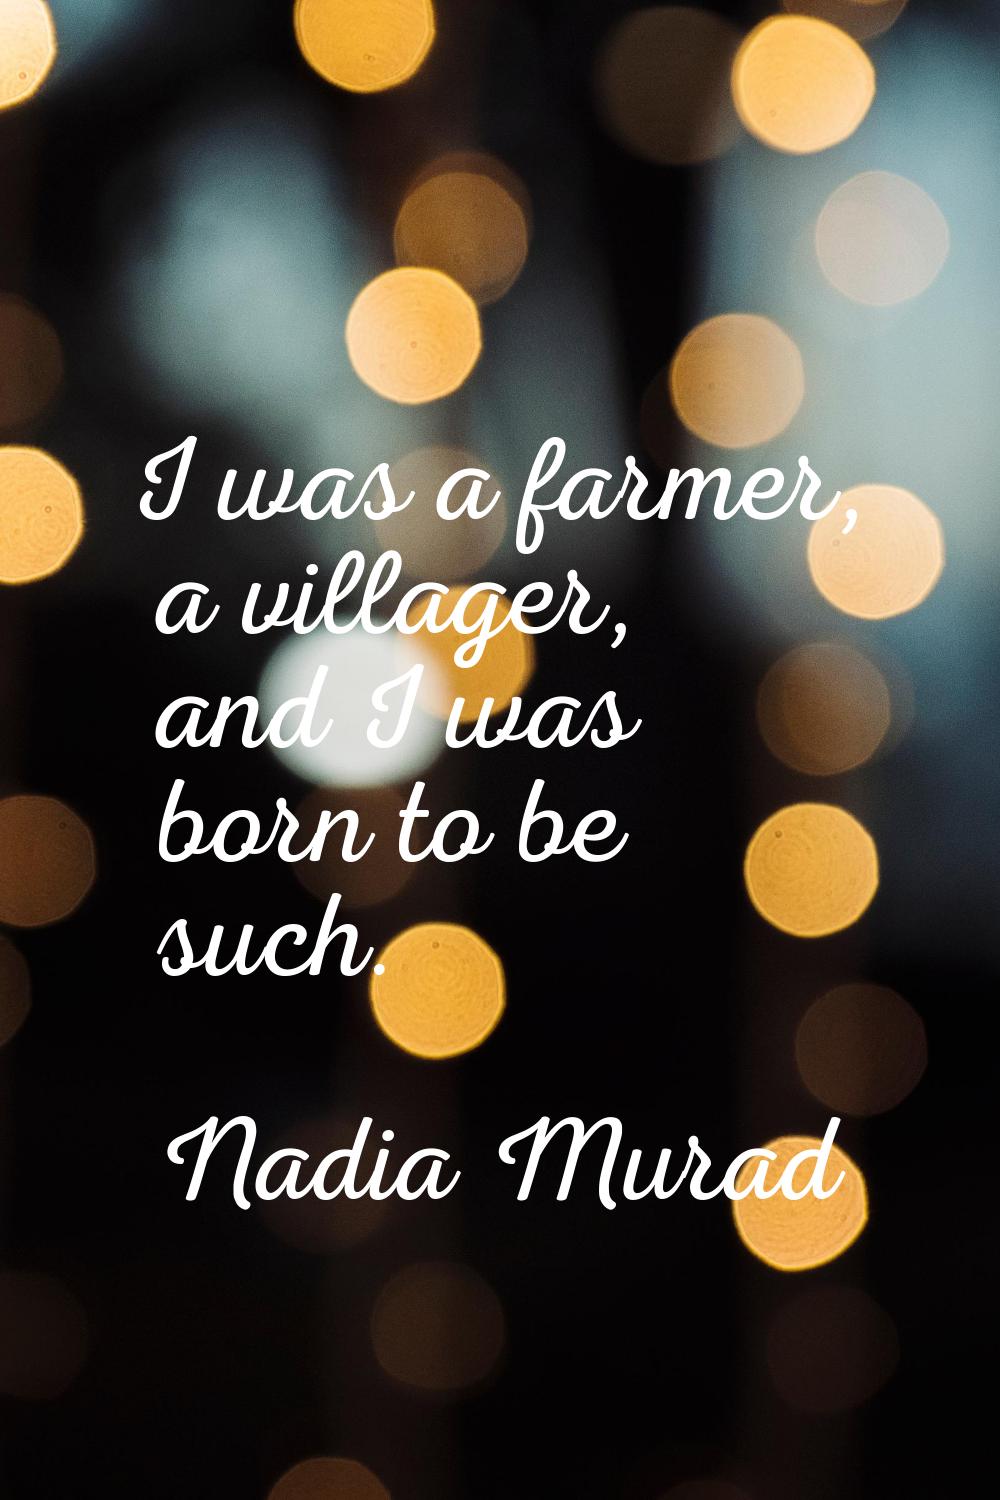 I was a farmer, a villager, and I was born to be such.